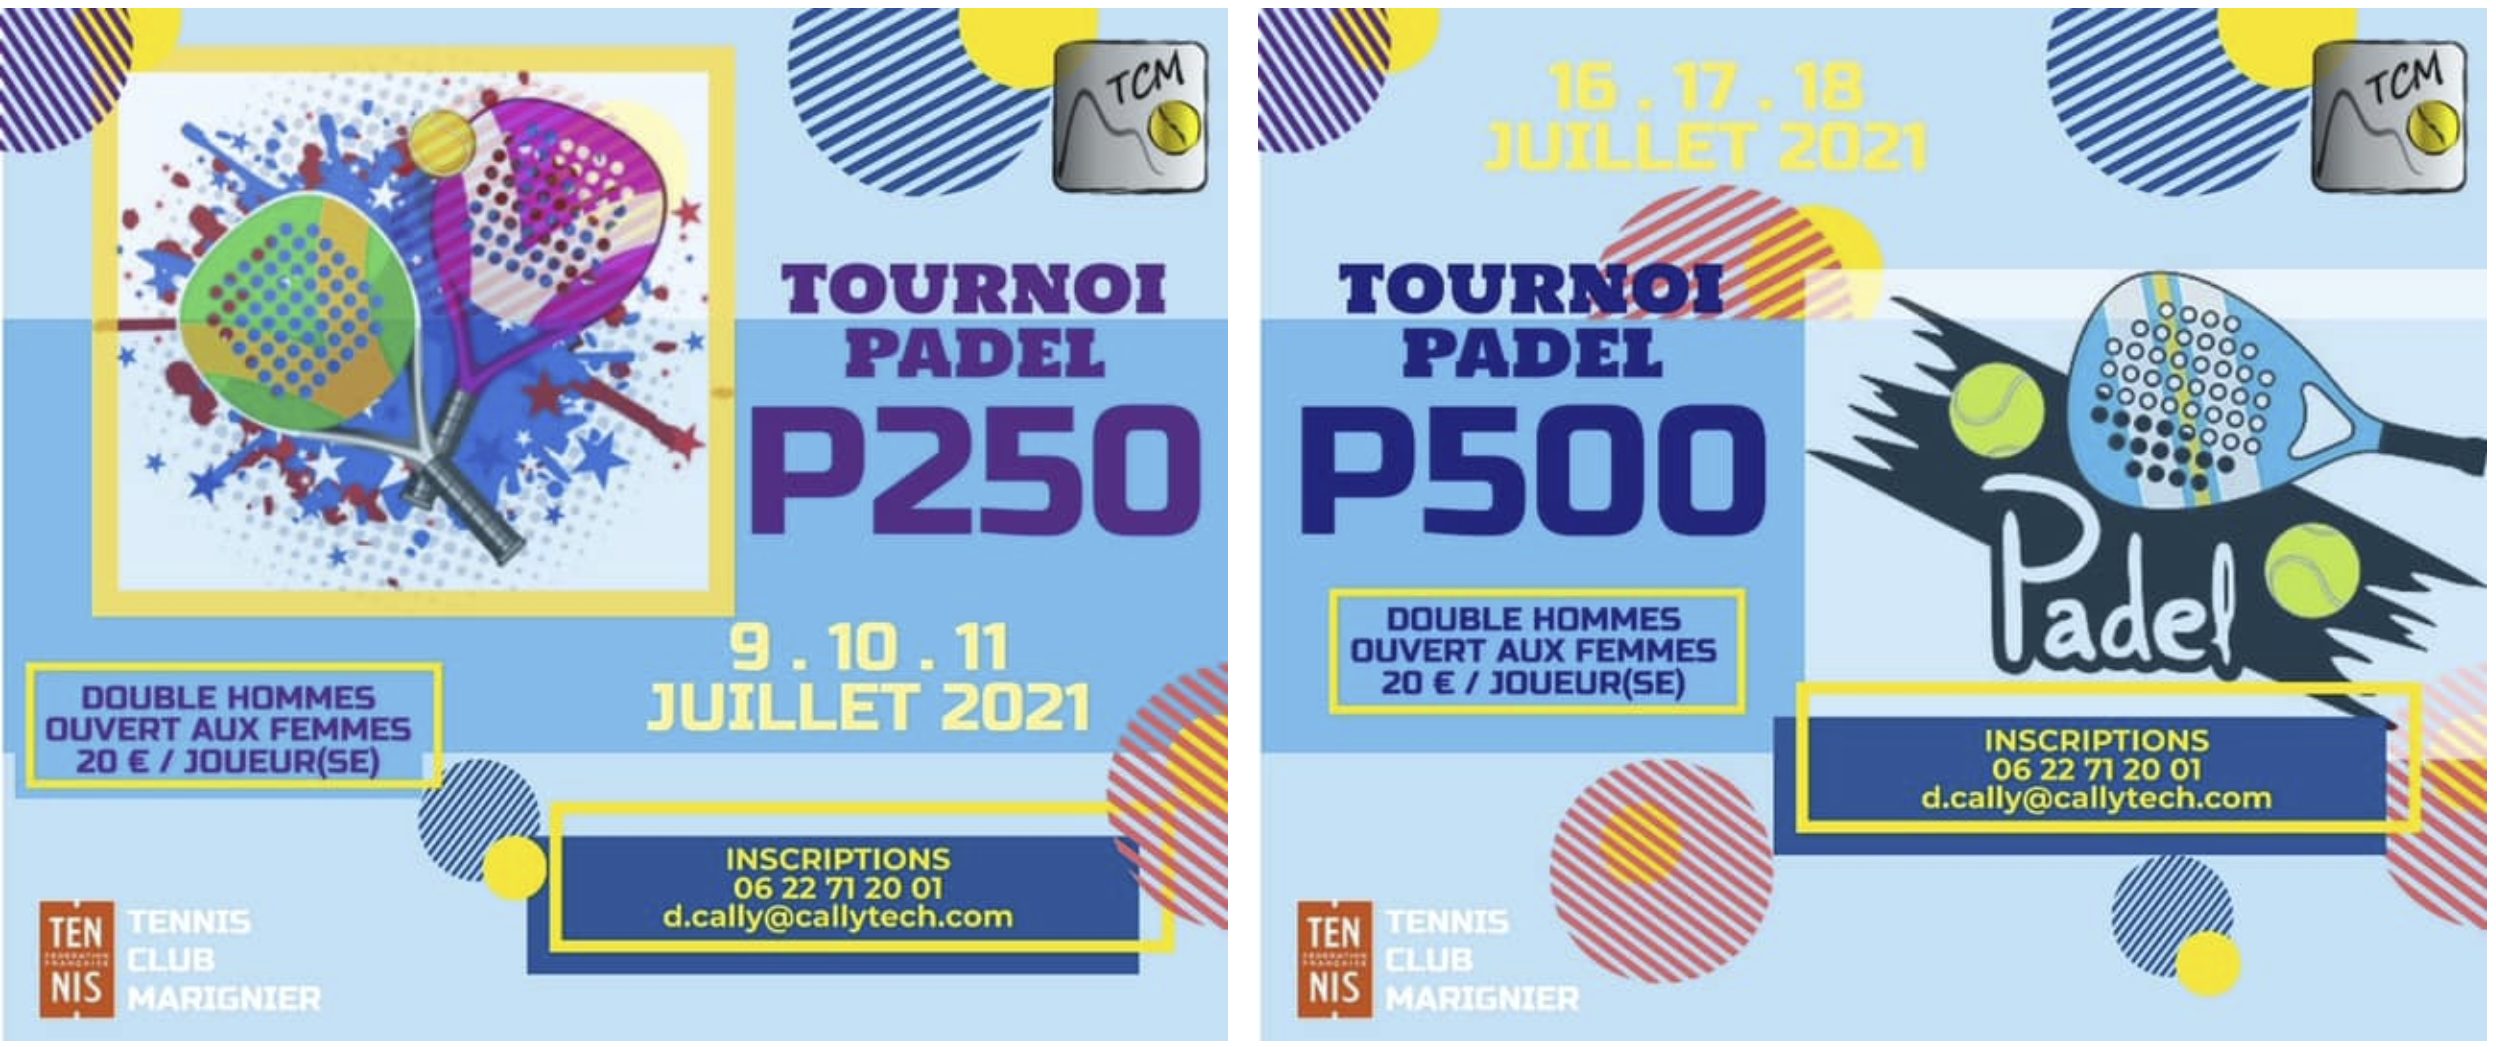 2 tournaments padel in Haute-Savoie not to be missed!